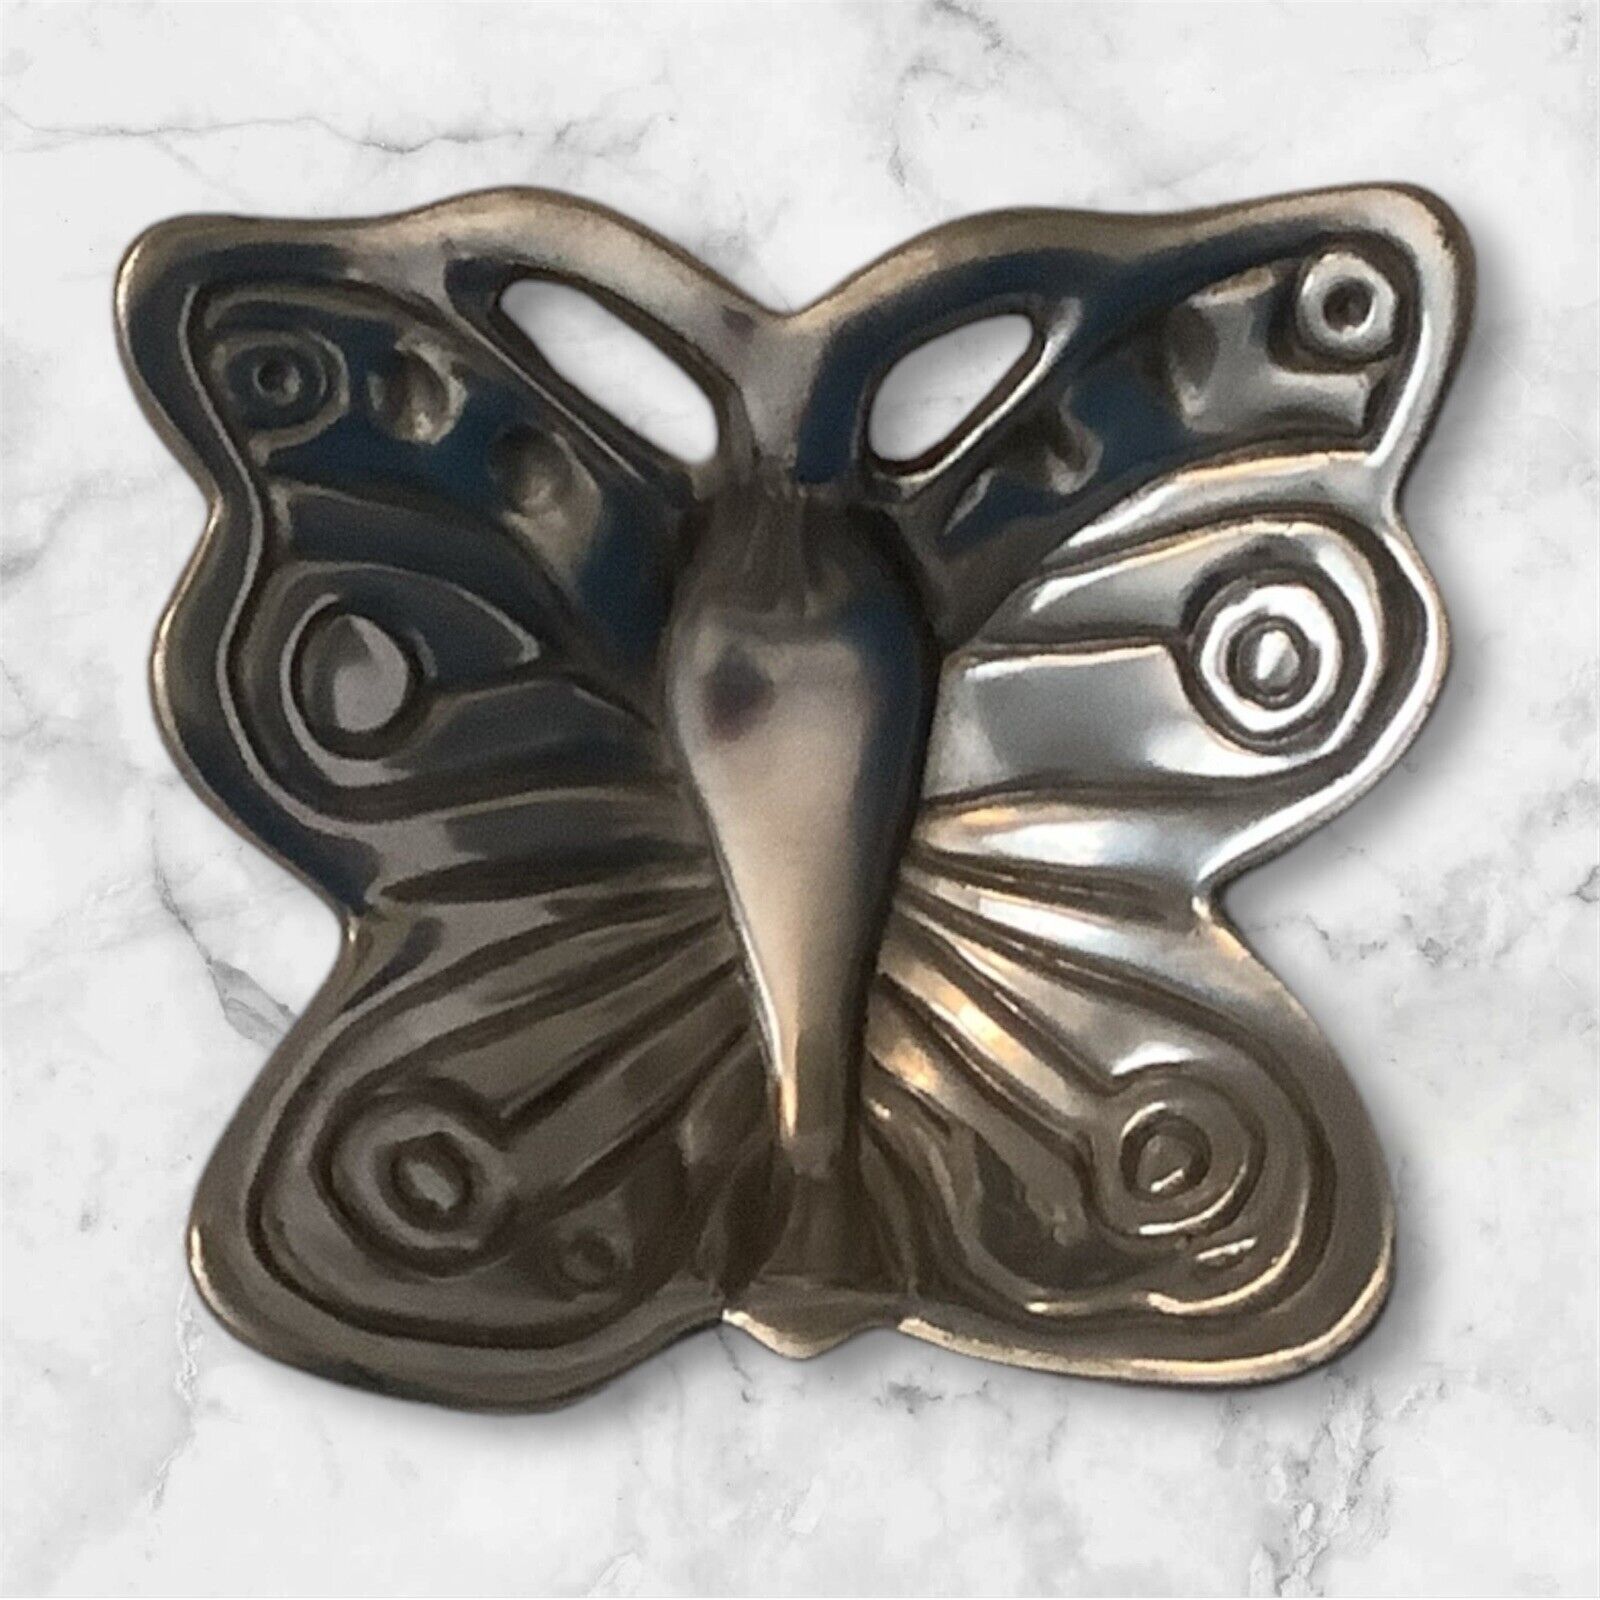 Pewter Butterfly Trinket Decorative Dish Vintage Home Decor Jewelry Holder